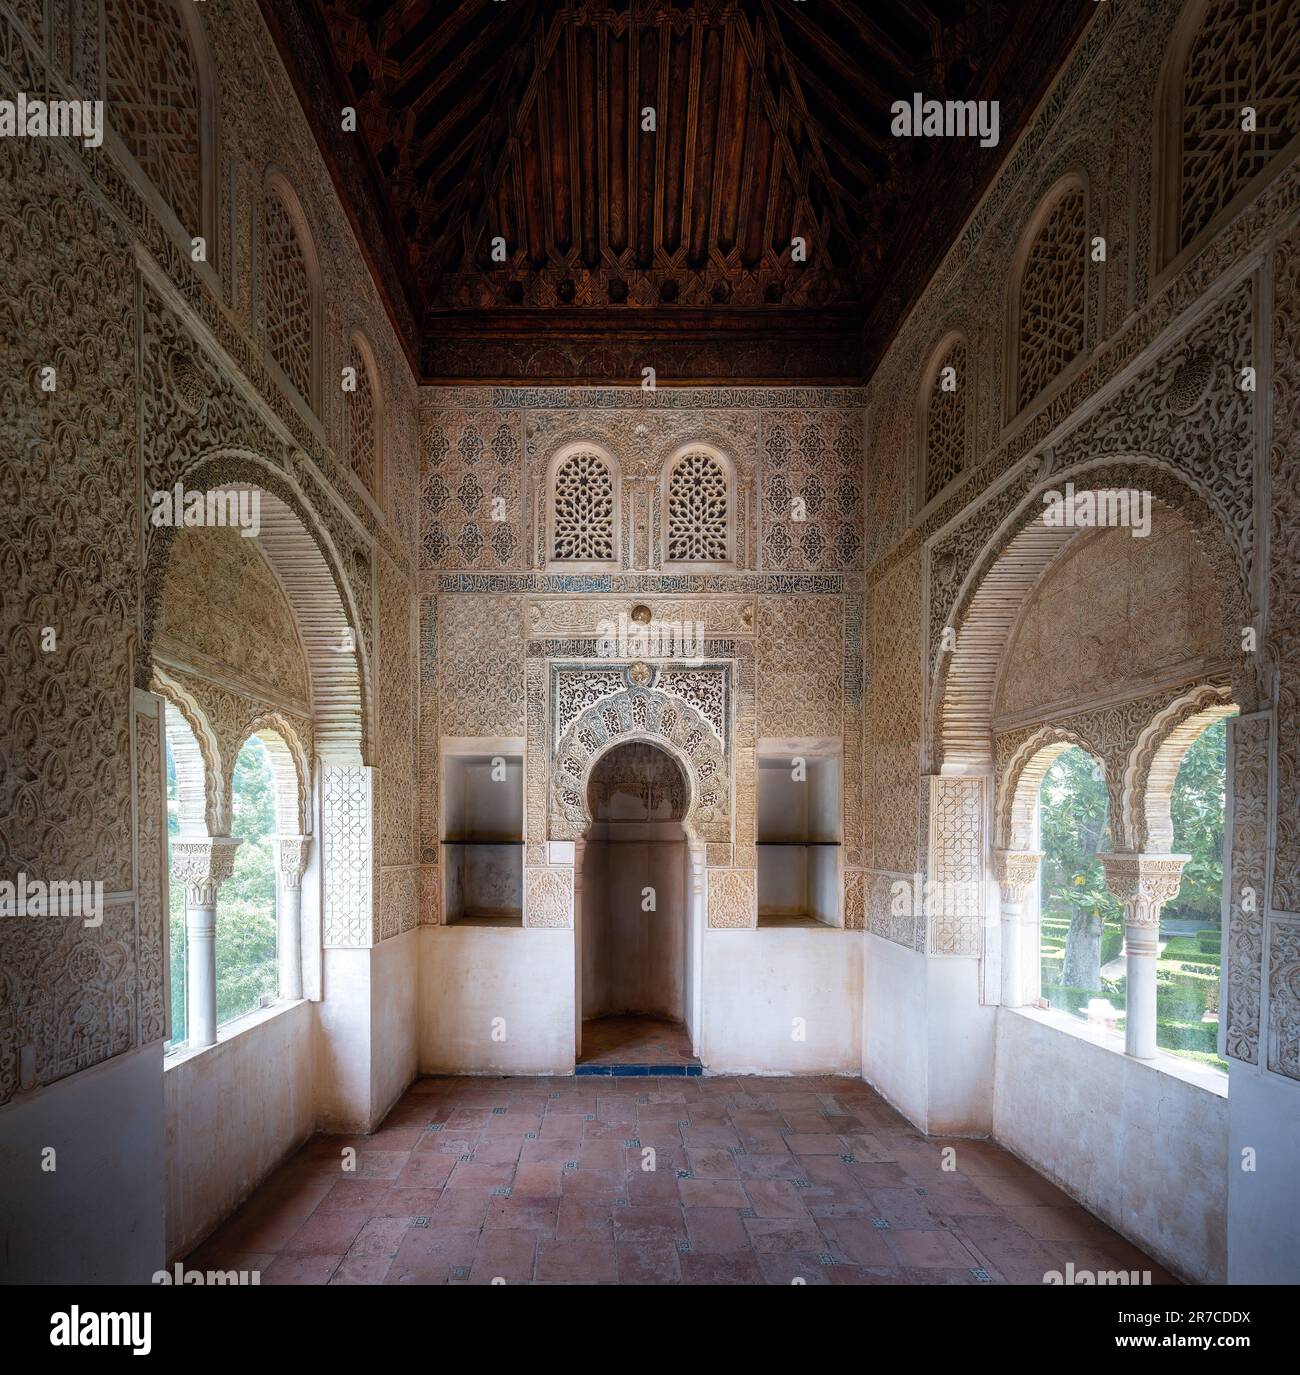 Interior of Oratory (Prayer Room) with Mihrab Niche at El Partal area of Alhambra - Granada, Andalusia, Spain Stock Photo